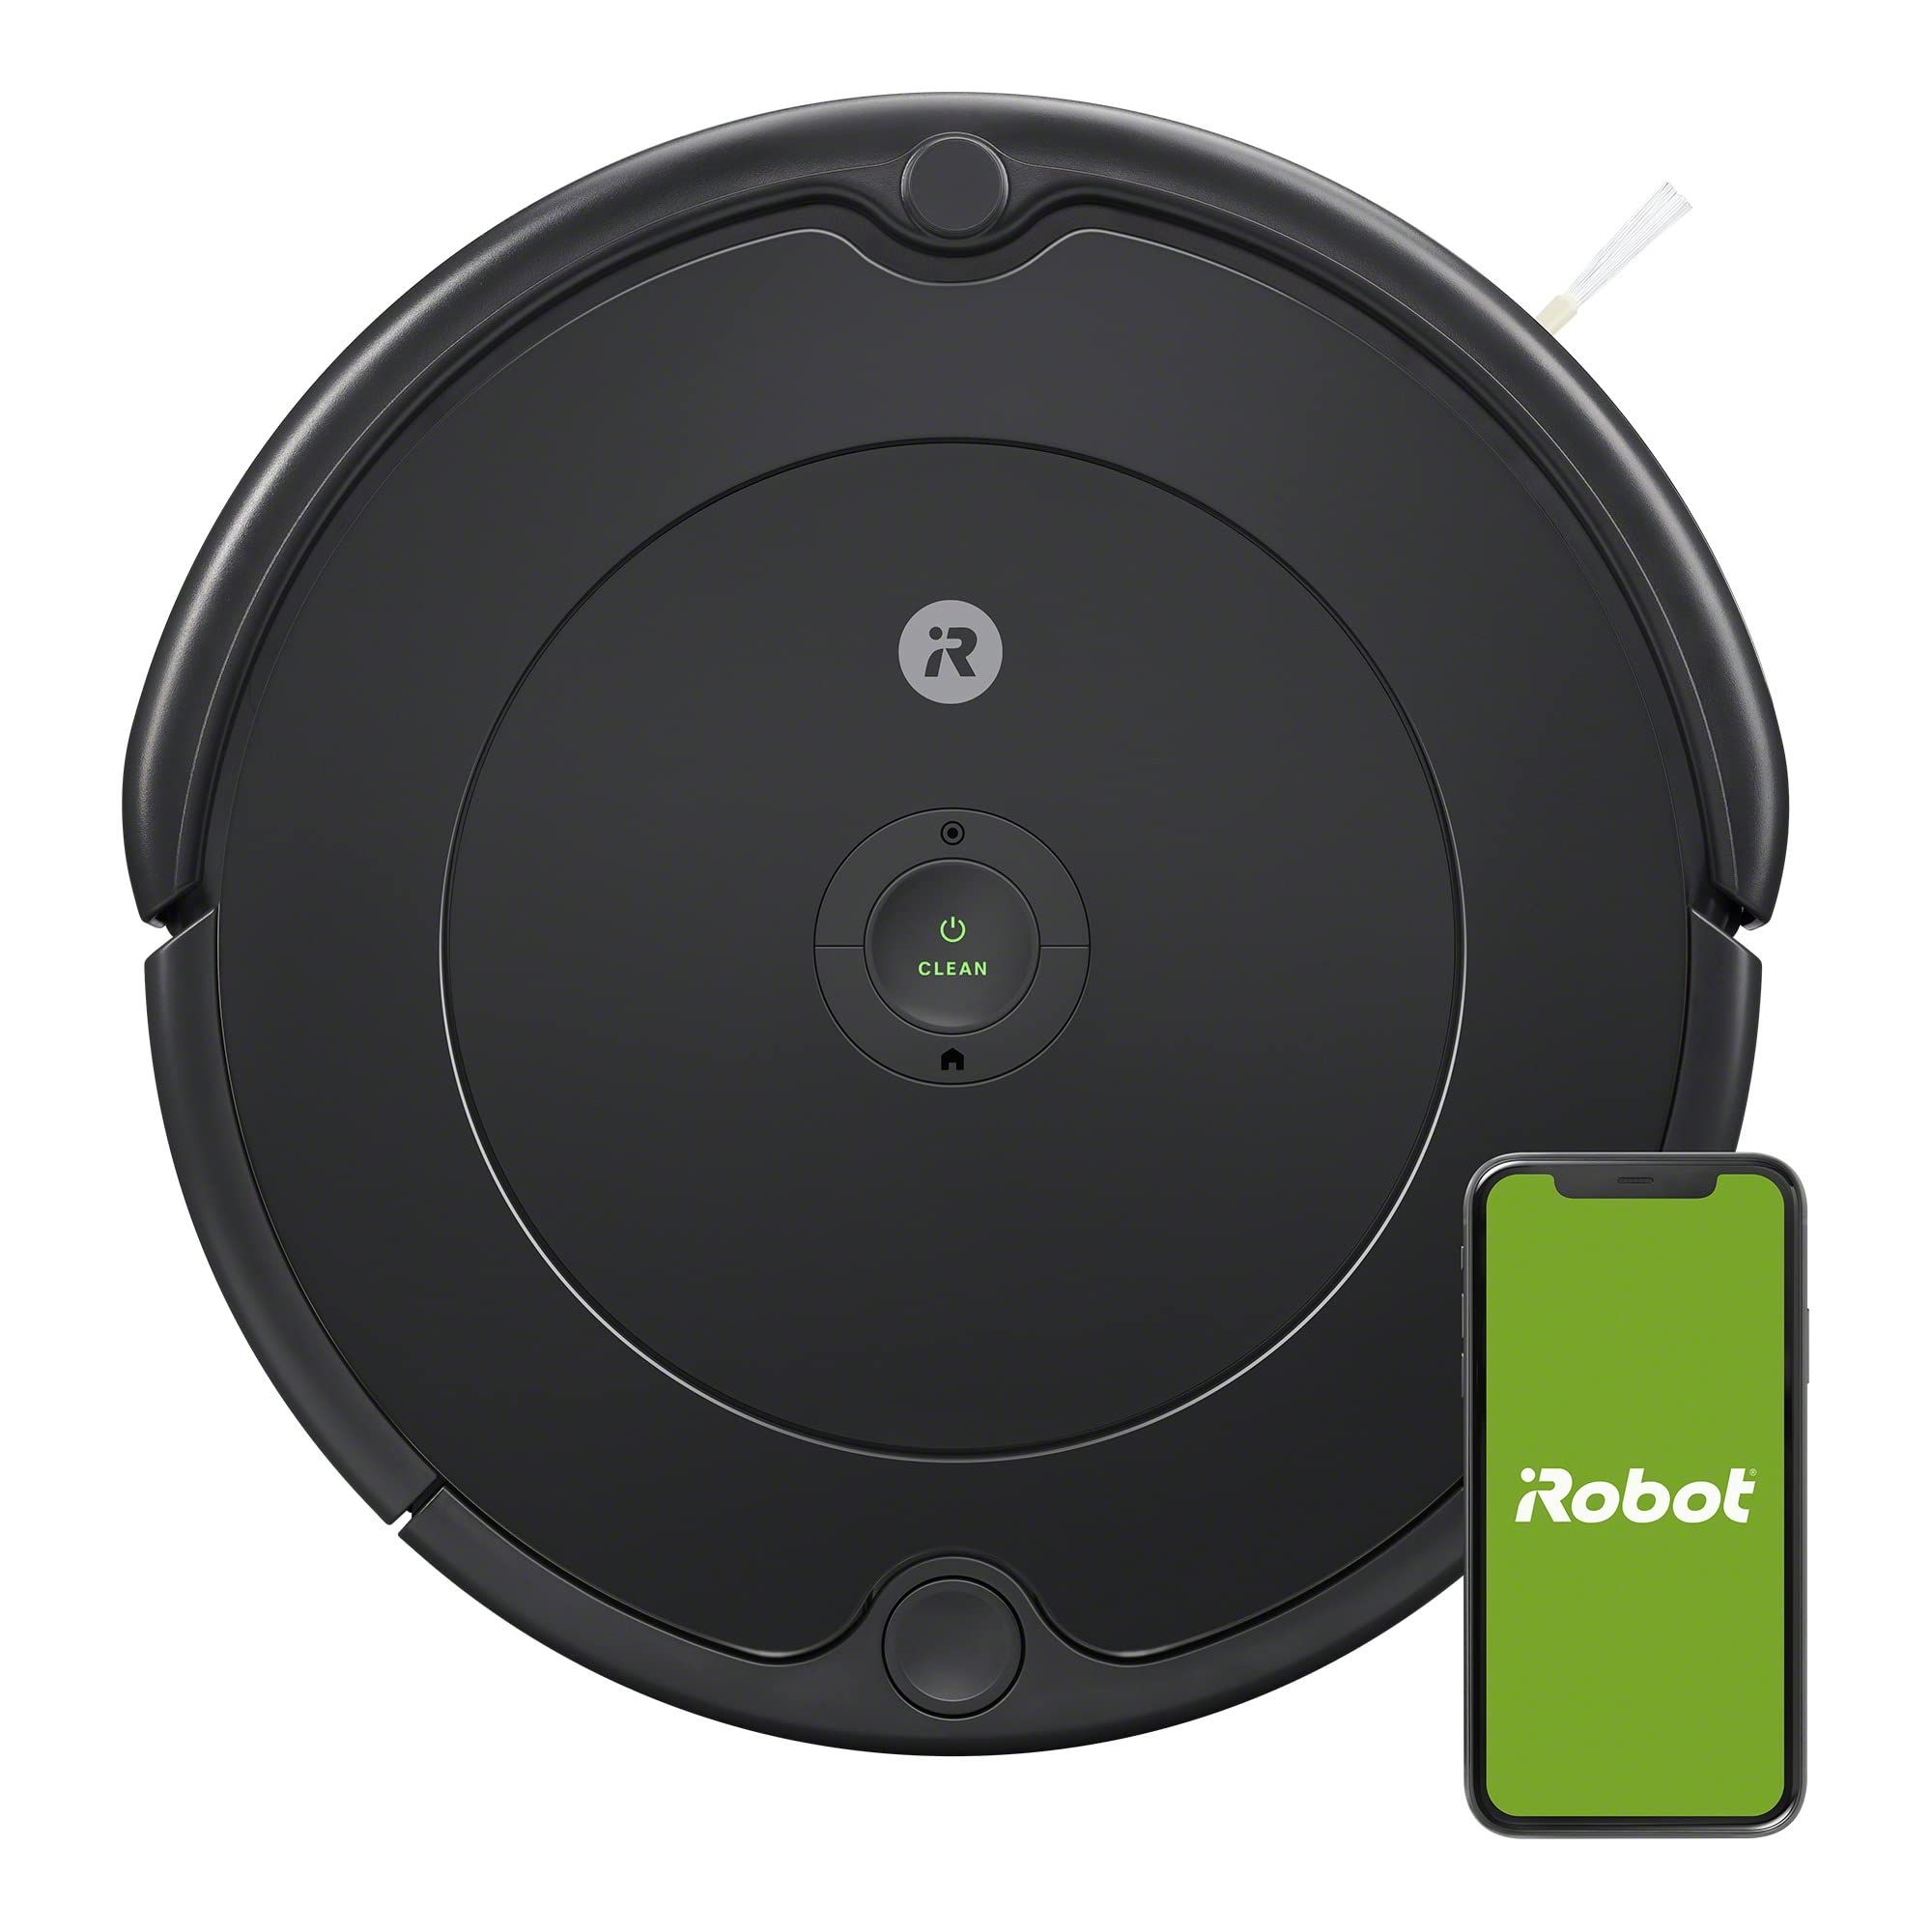 iRobot Roomba 692 Robot Vacuum - Wi-Fi Connected, Personalized Cleaning Recommendations $165